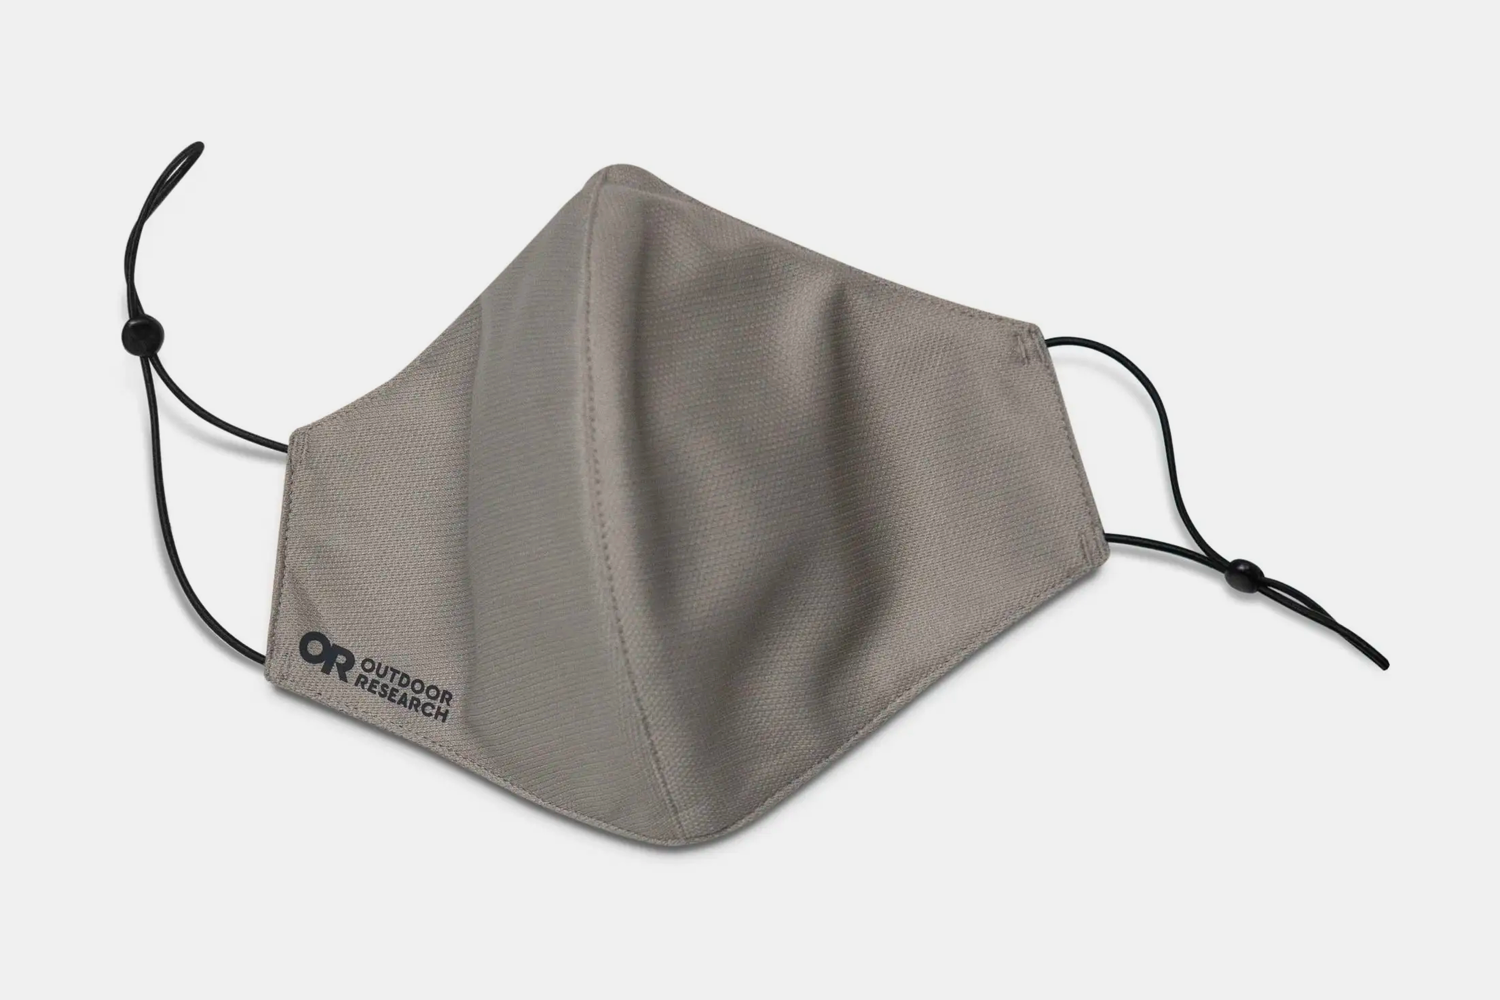 Outdoor Research Face Cover Kit